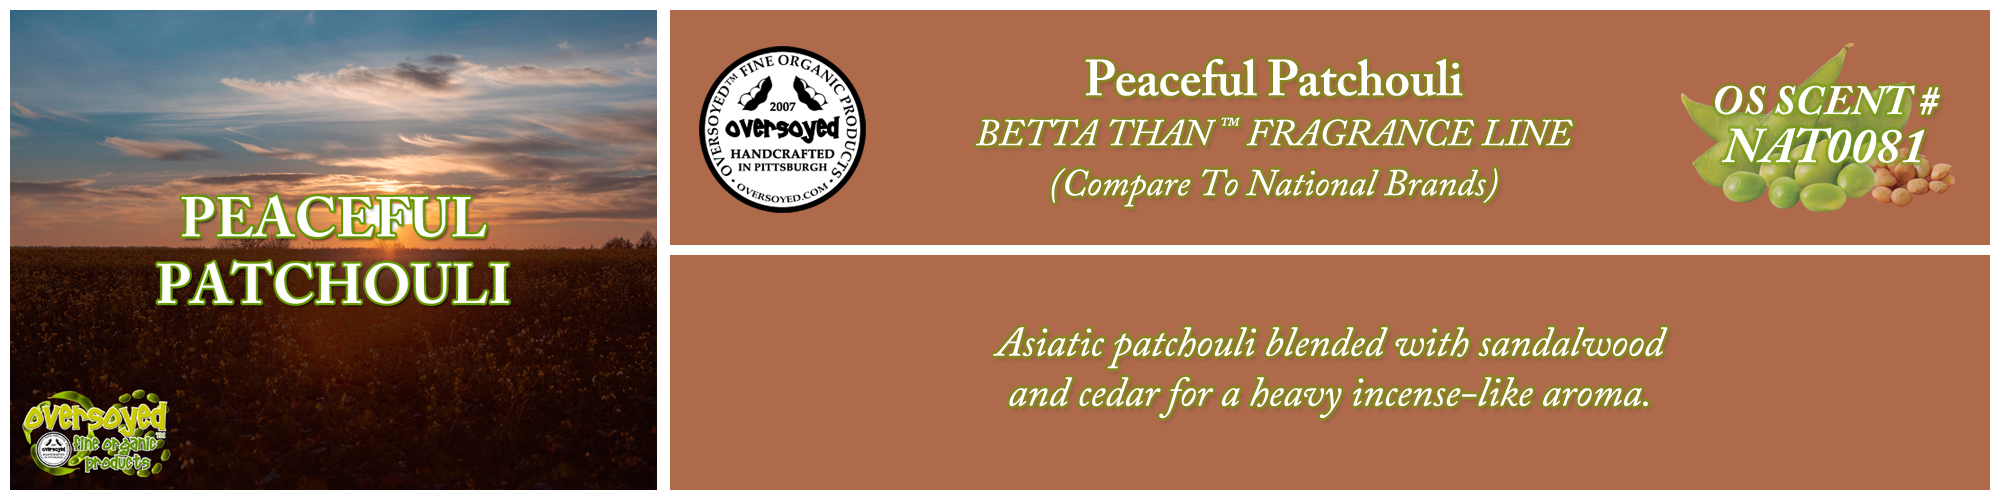 Peaceful Patchouli Handcrafted Products Collection